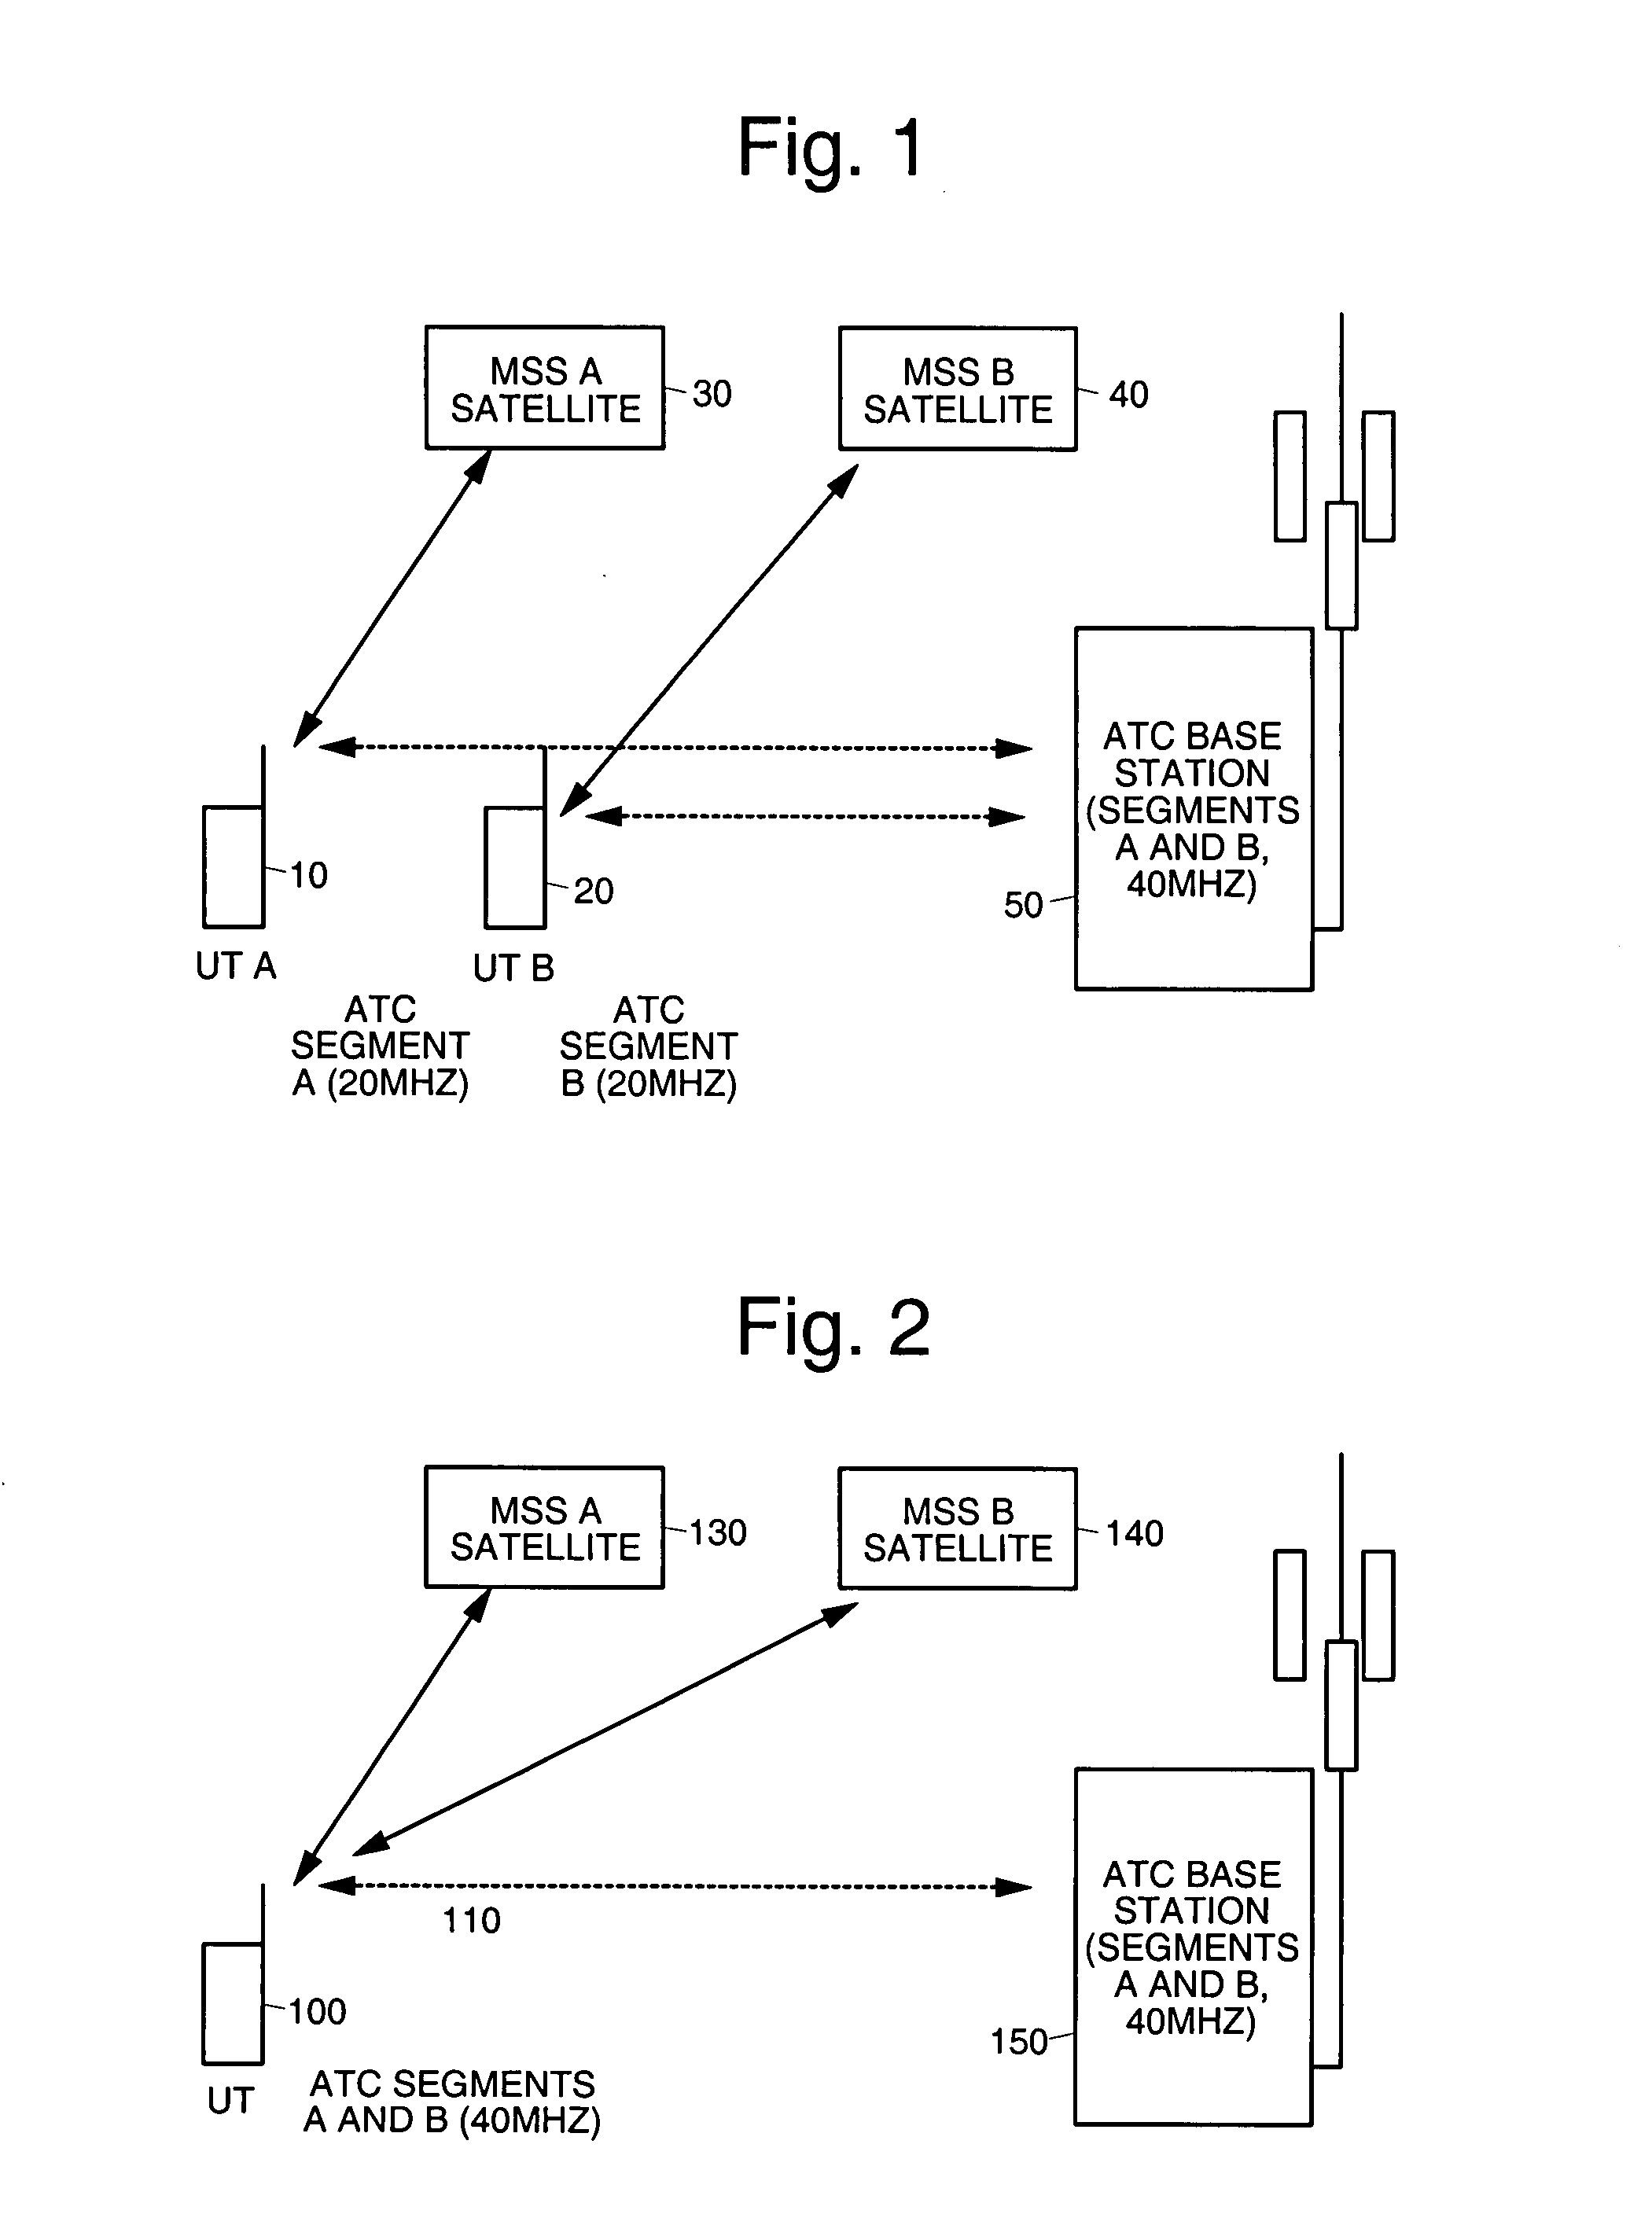 Ancillary terrestrial component services using multiple frequency bands